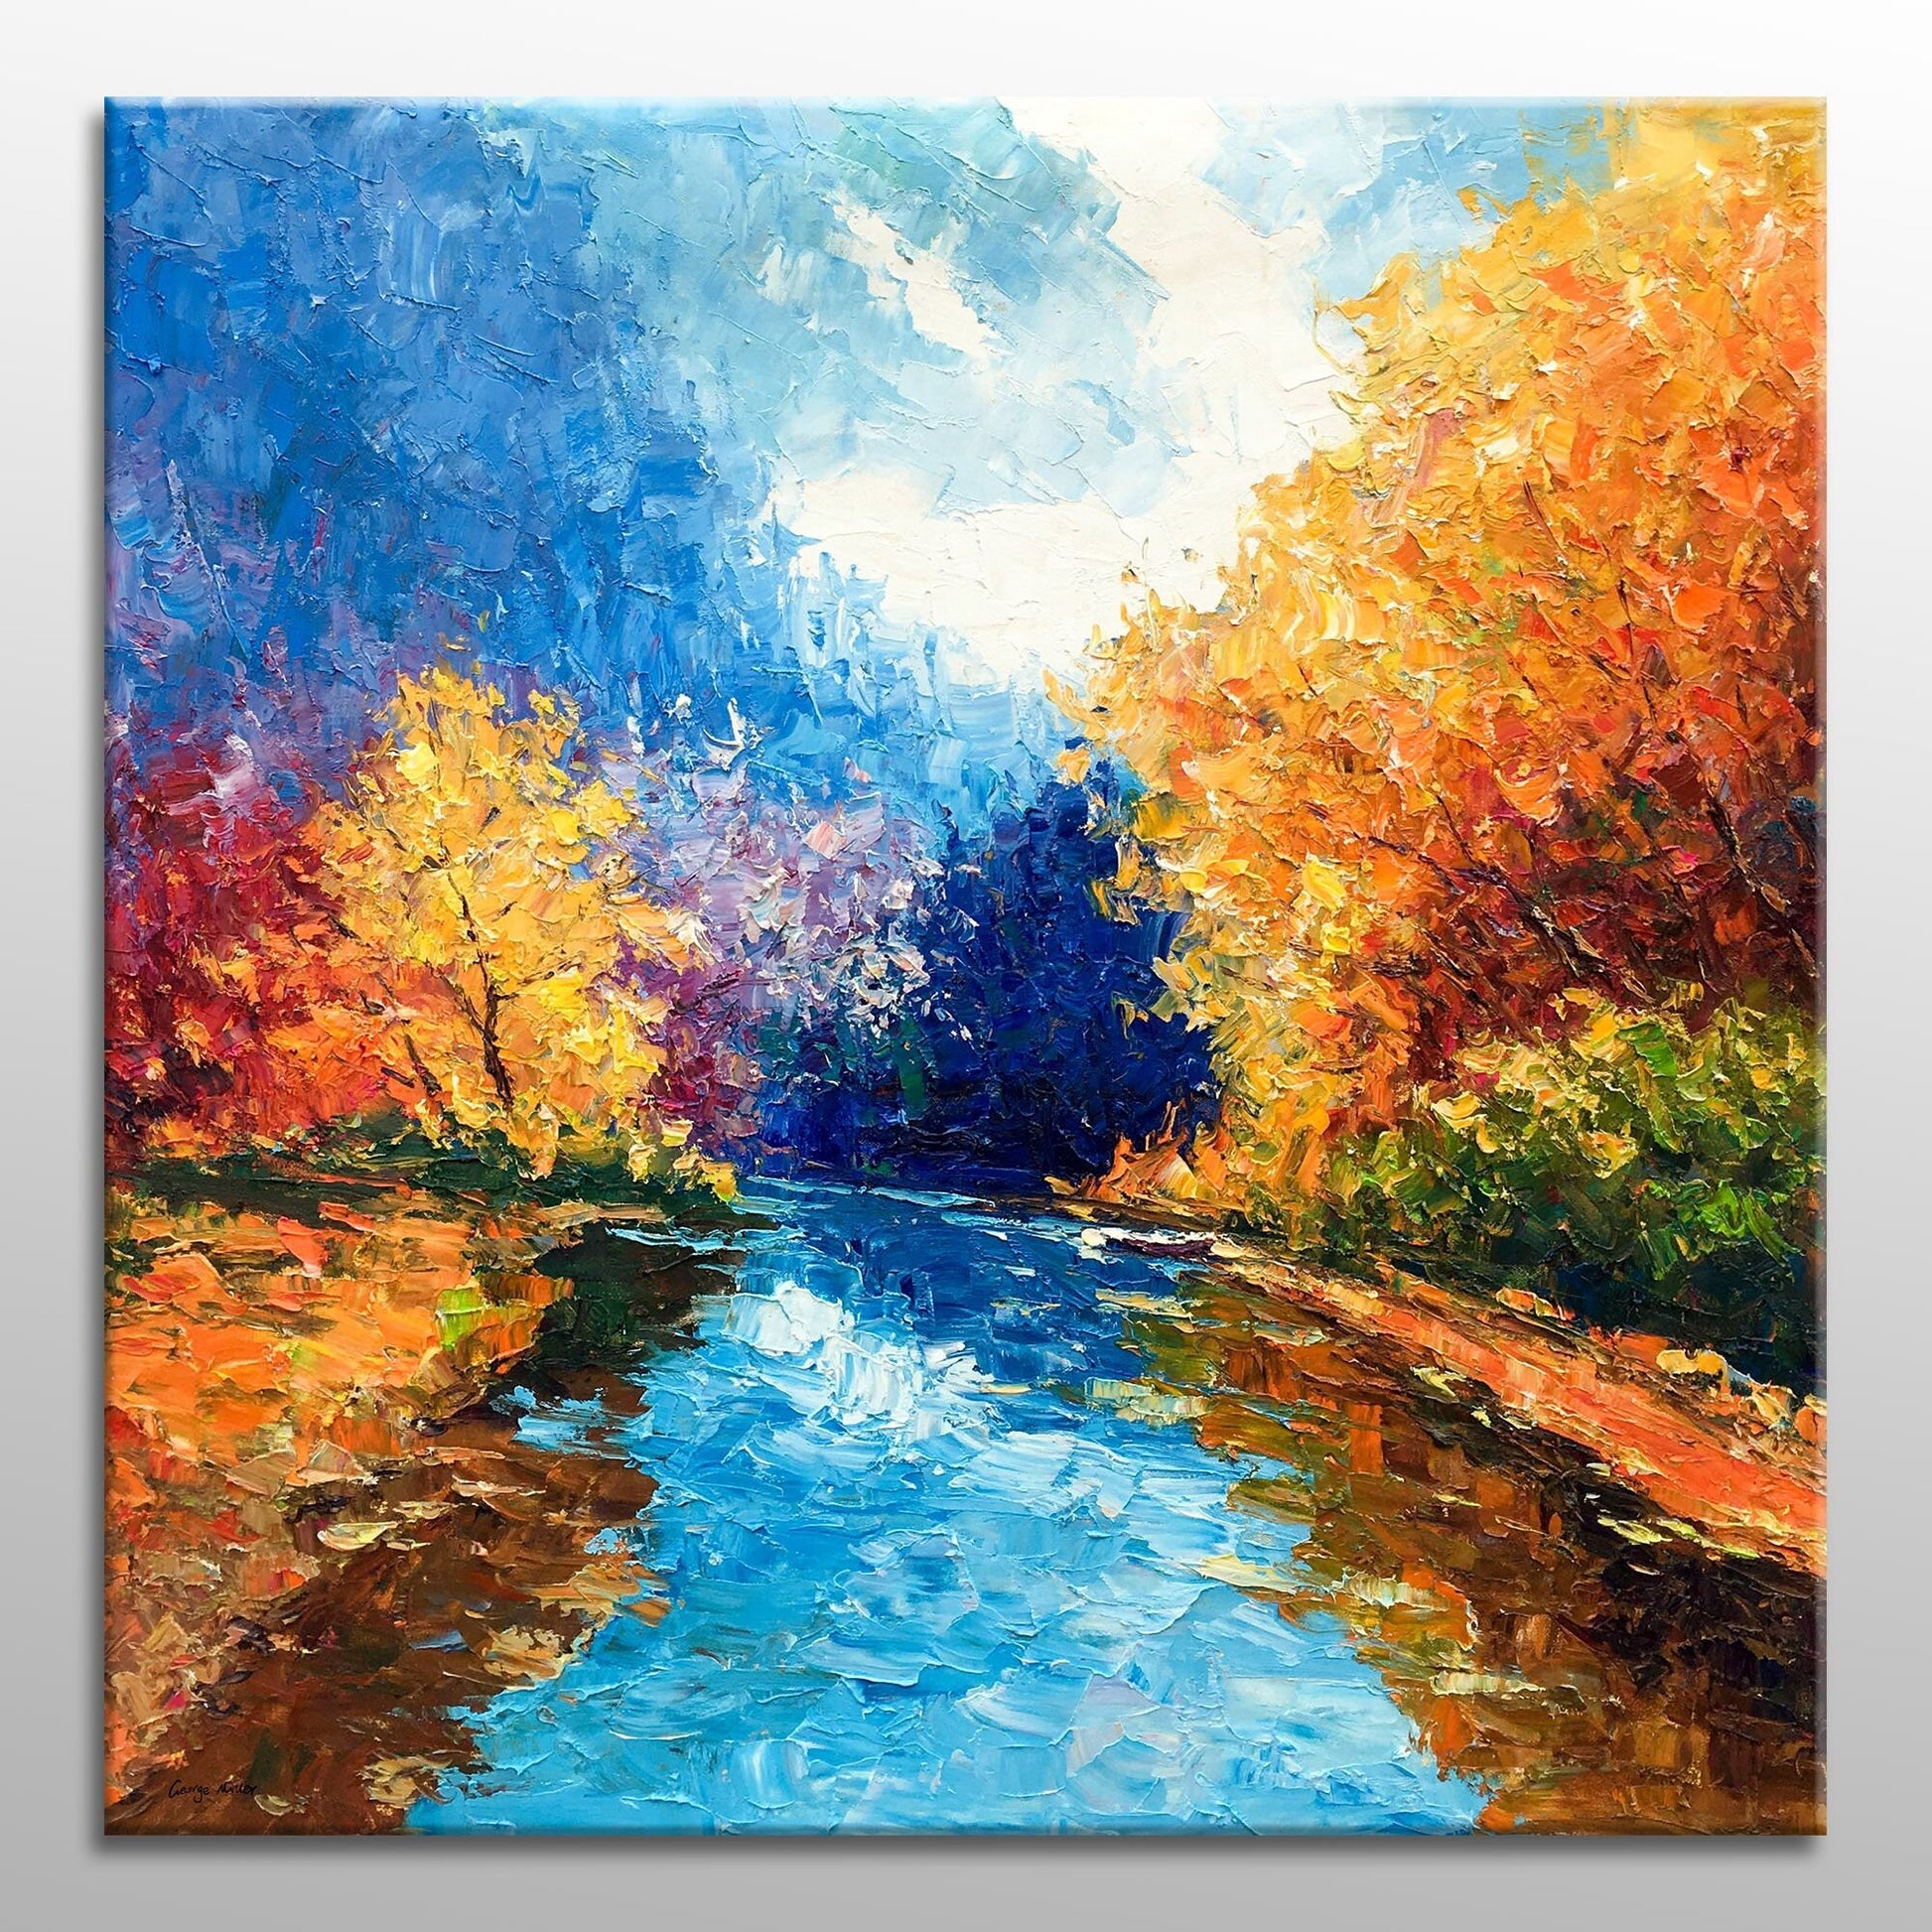 Oil Painting Landscape Autumn Forest, Wall Art, Large Wall Art Painting, Abstract Canvas Painting, Original Art, Landscape Oil Paintings